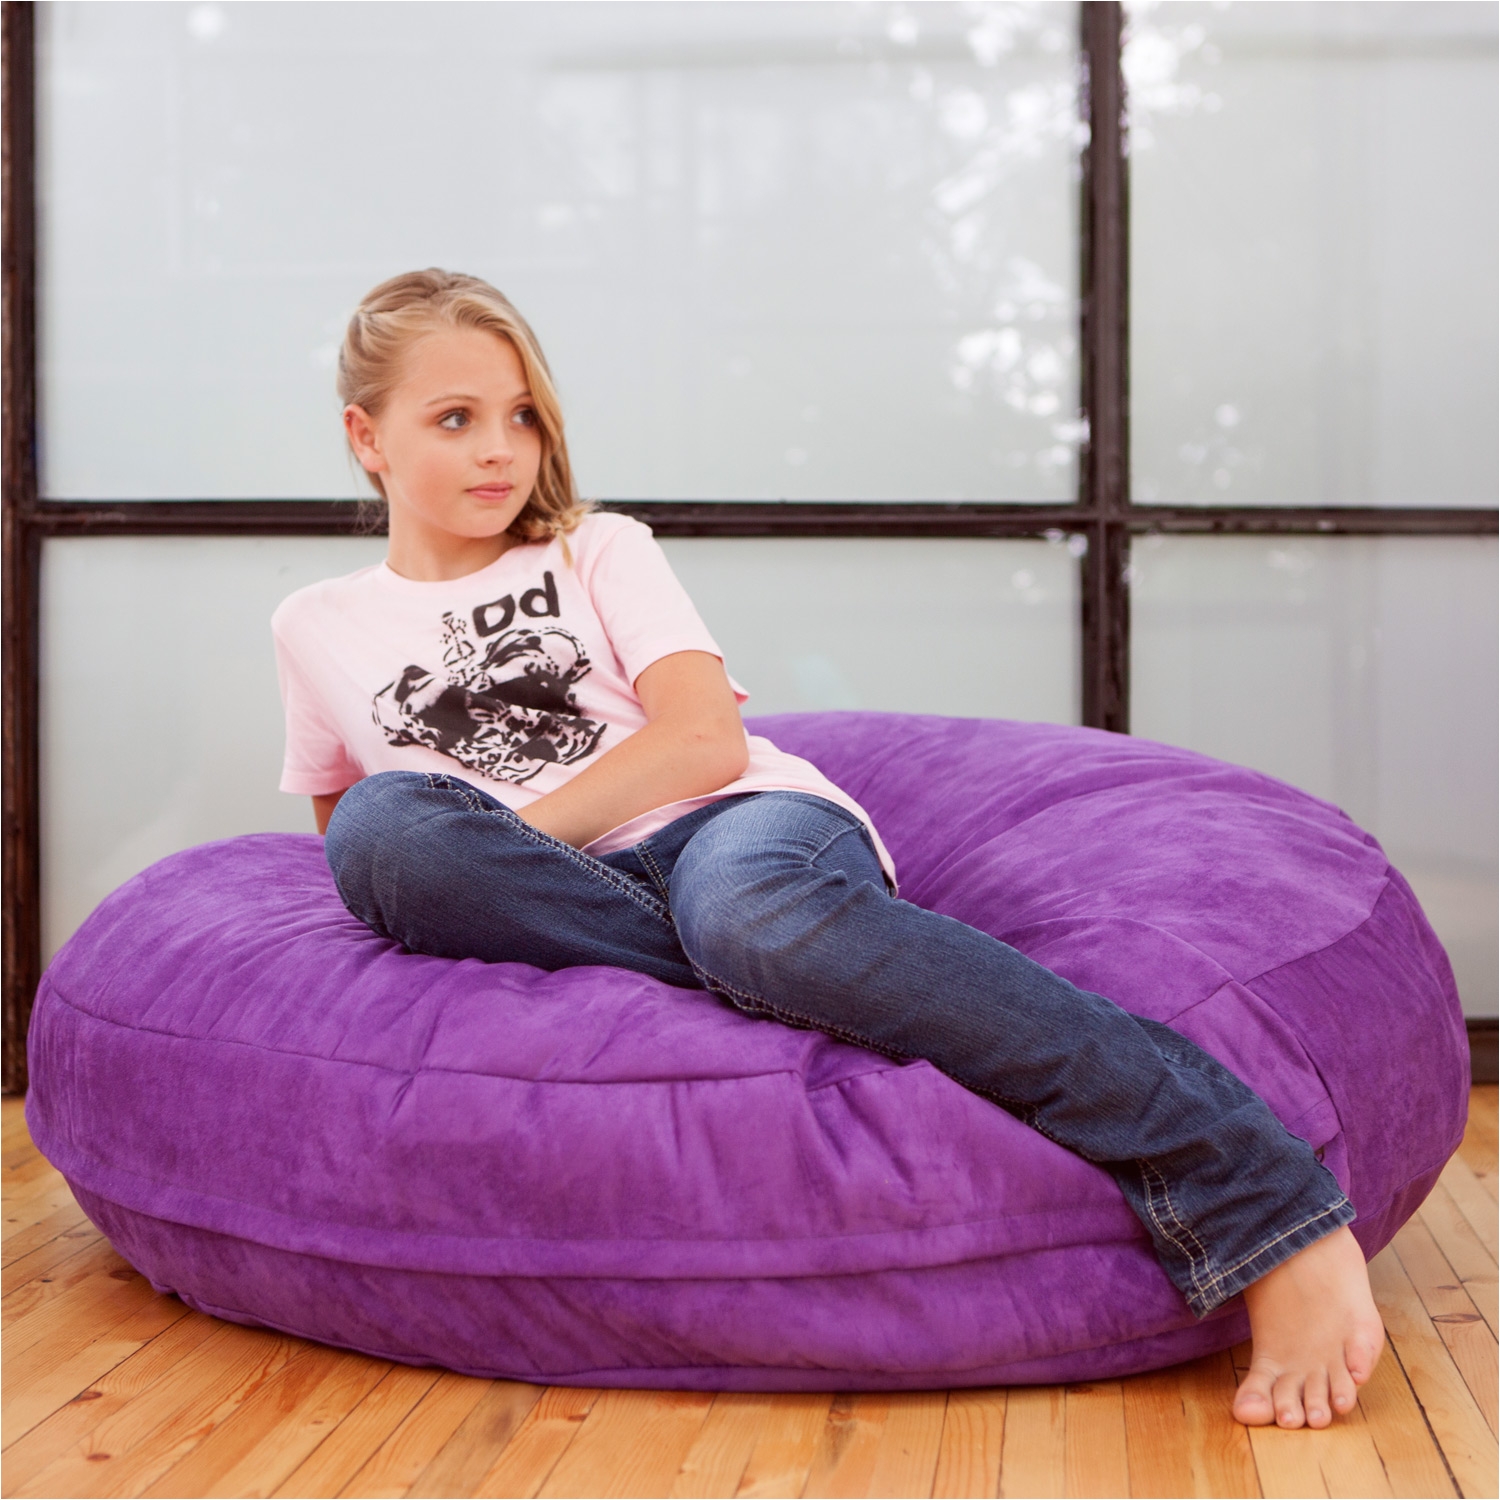 Best Bing Bag Chairs Funiture the Right Options Of Bean Bag Chairs for Your Kids that